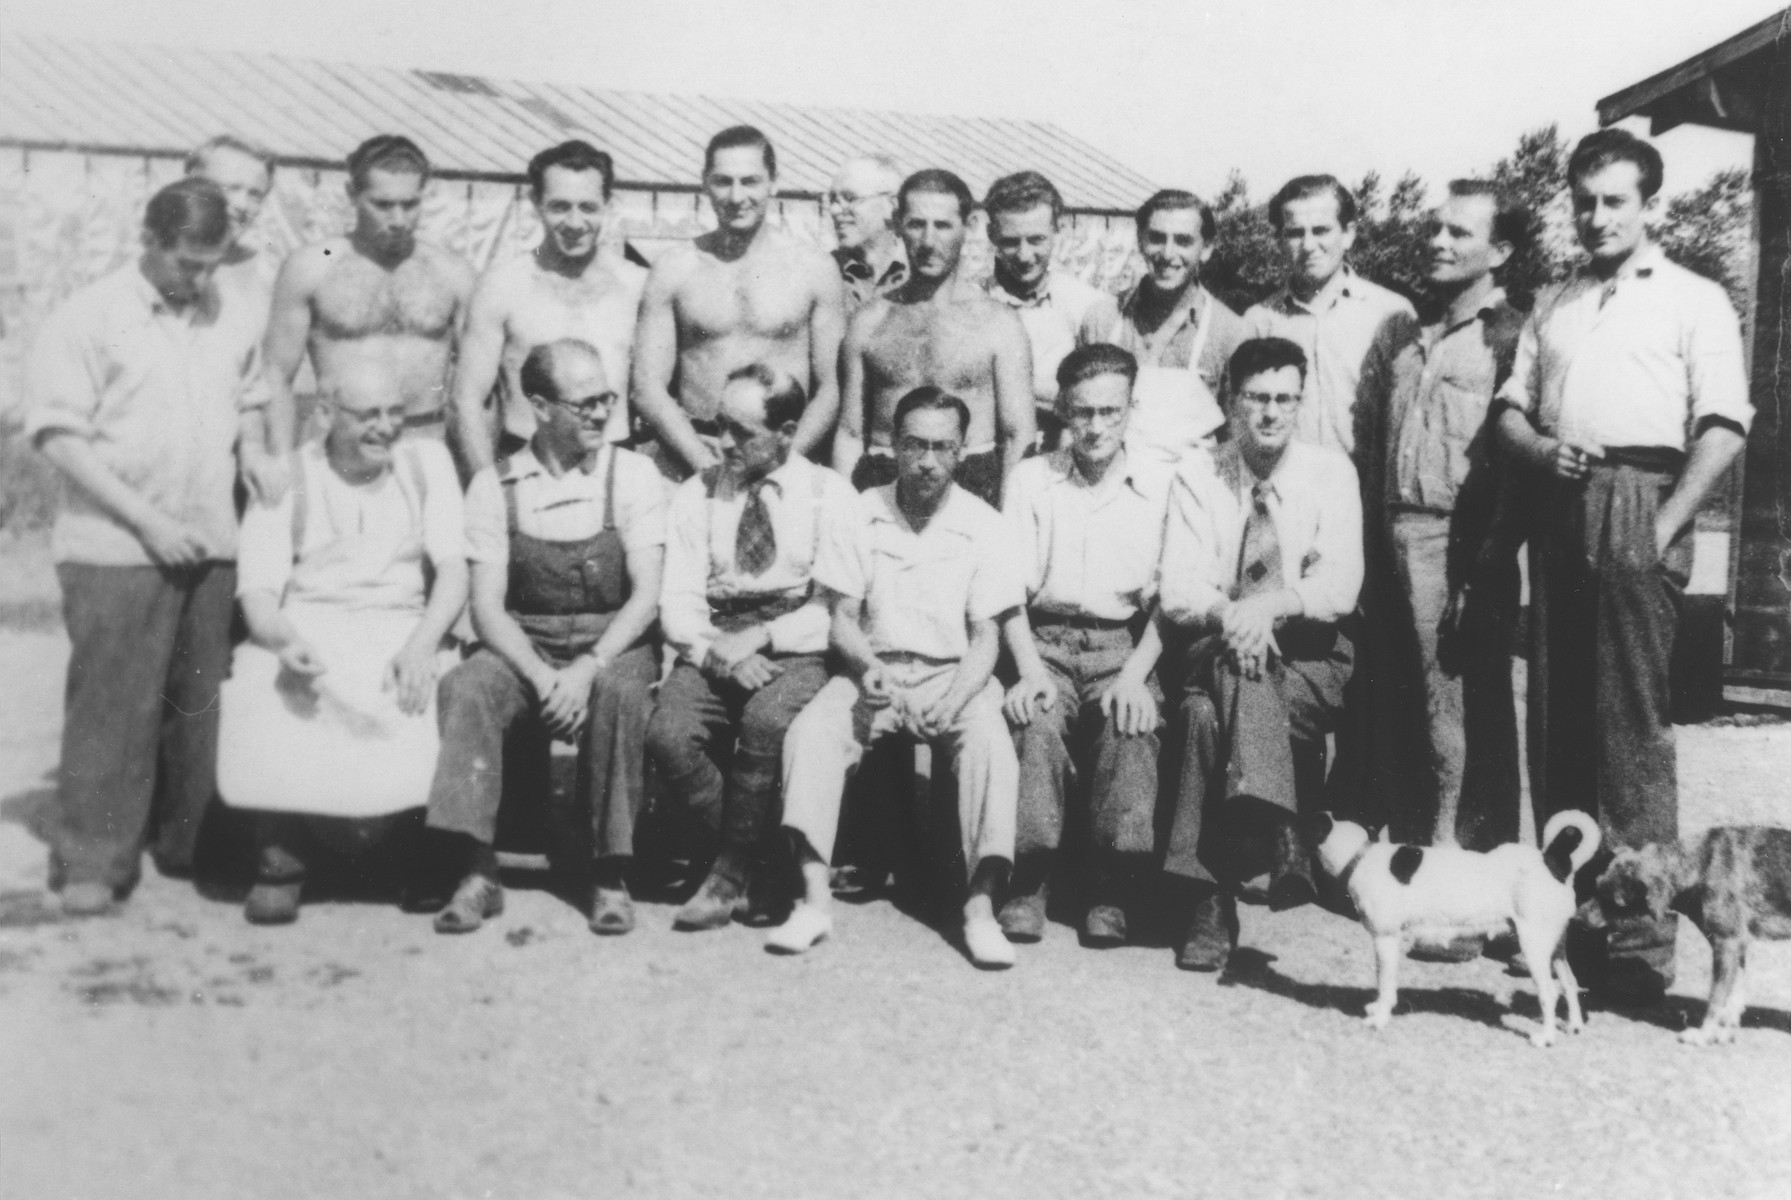 Group portrait of foreign workers assigned to the food supply department at the Gurs internment camp.

Two of those pictured, Bustamante and Vigo, were former members of the Spanish Republican army.  Vigo had been the mayor of Badalona.  All the others were Jewish. 

Seated from left to right are Jakob Dreyfus, Bustamante, Francois Marine, Pedro Vigo Giro, Szlama Szmaragd and René Karschon.  Standing are Vogelsang, Walter Todt, Ossi Kohut, Sepp Grumkin, Hayek, Reinach, Alex Gruber, Franz Wrobel, Pauli Kupferberg, Kurt de Jonghe, Zaiakowski and Kurt Mautner.